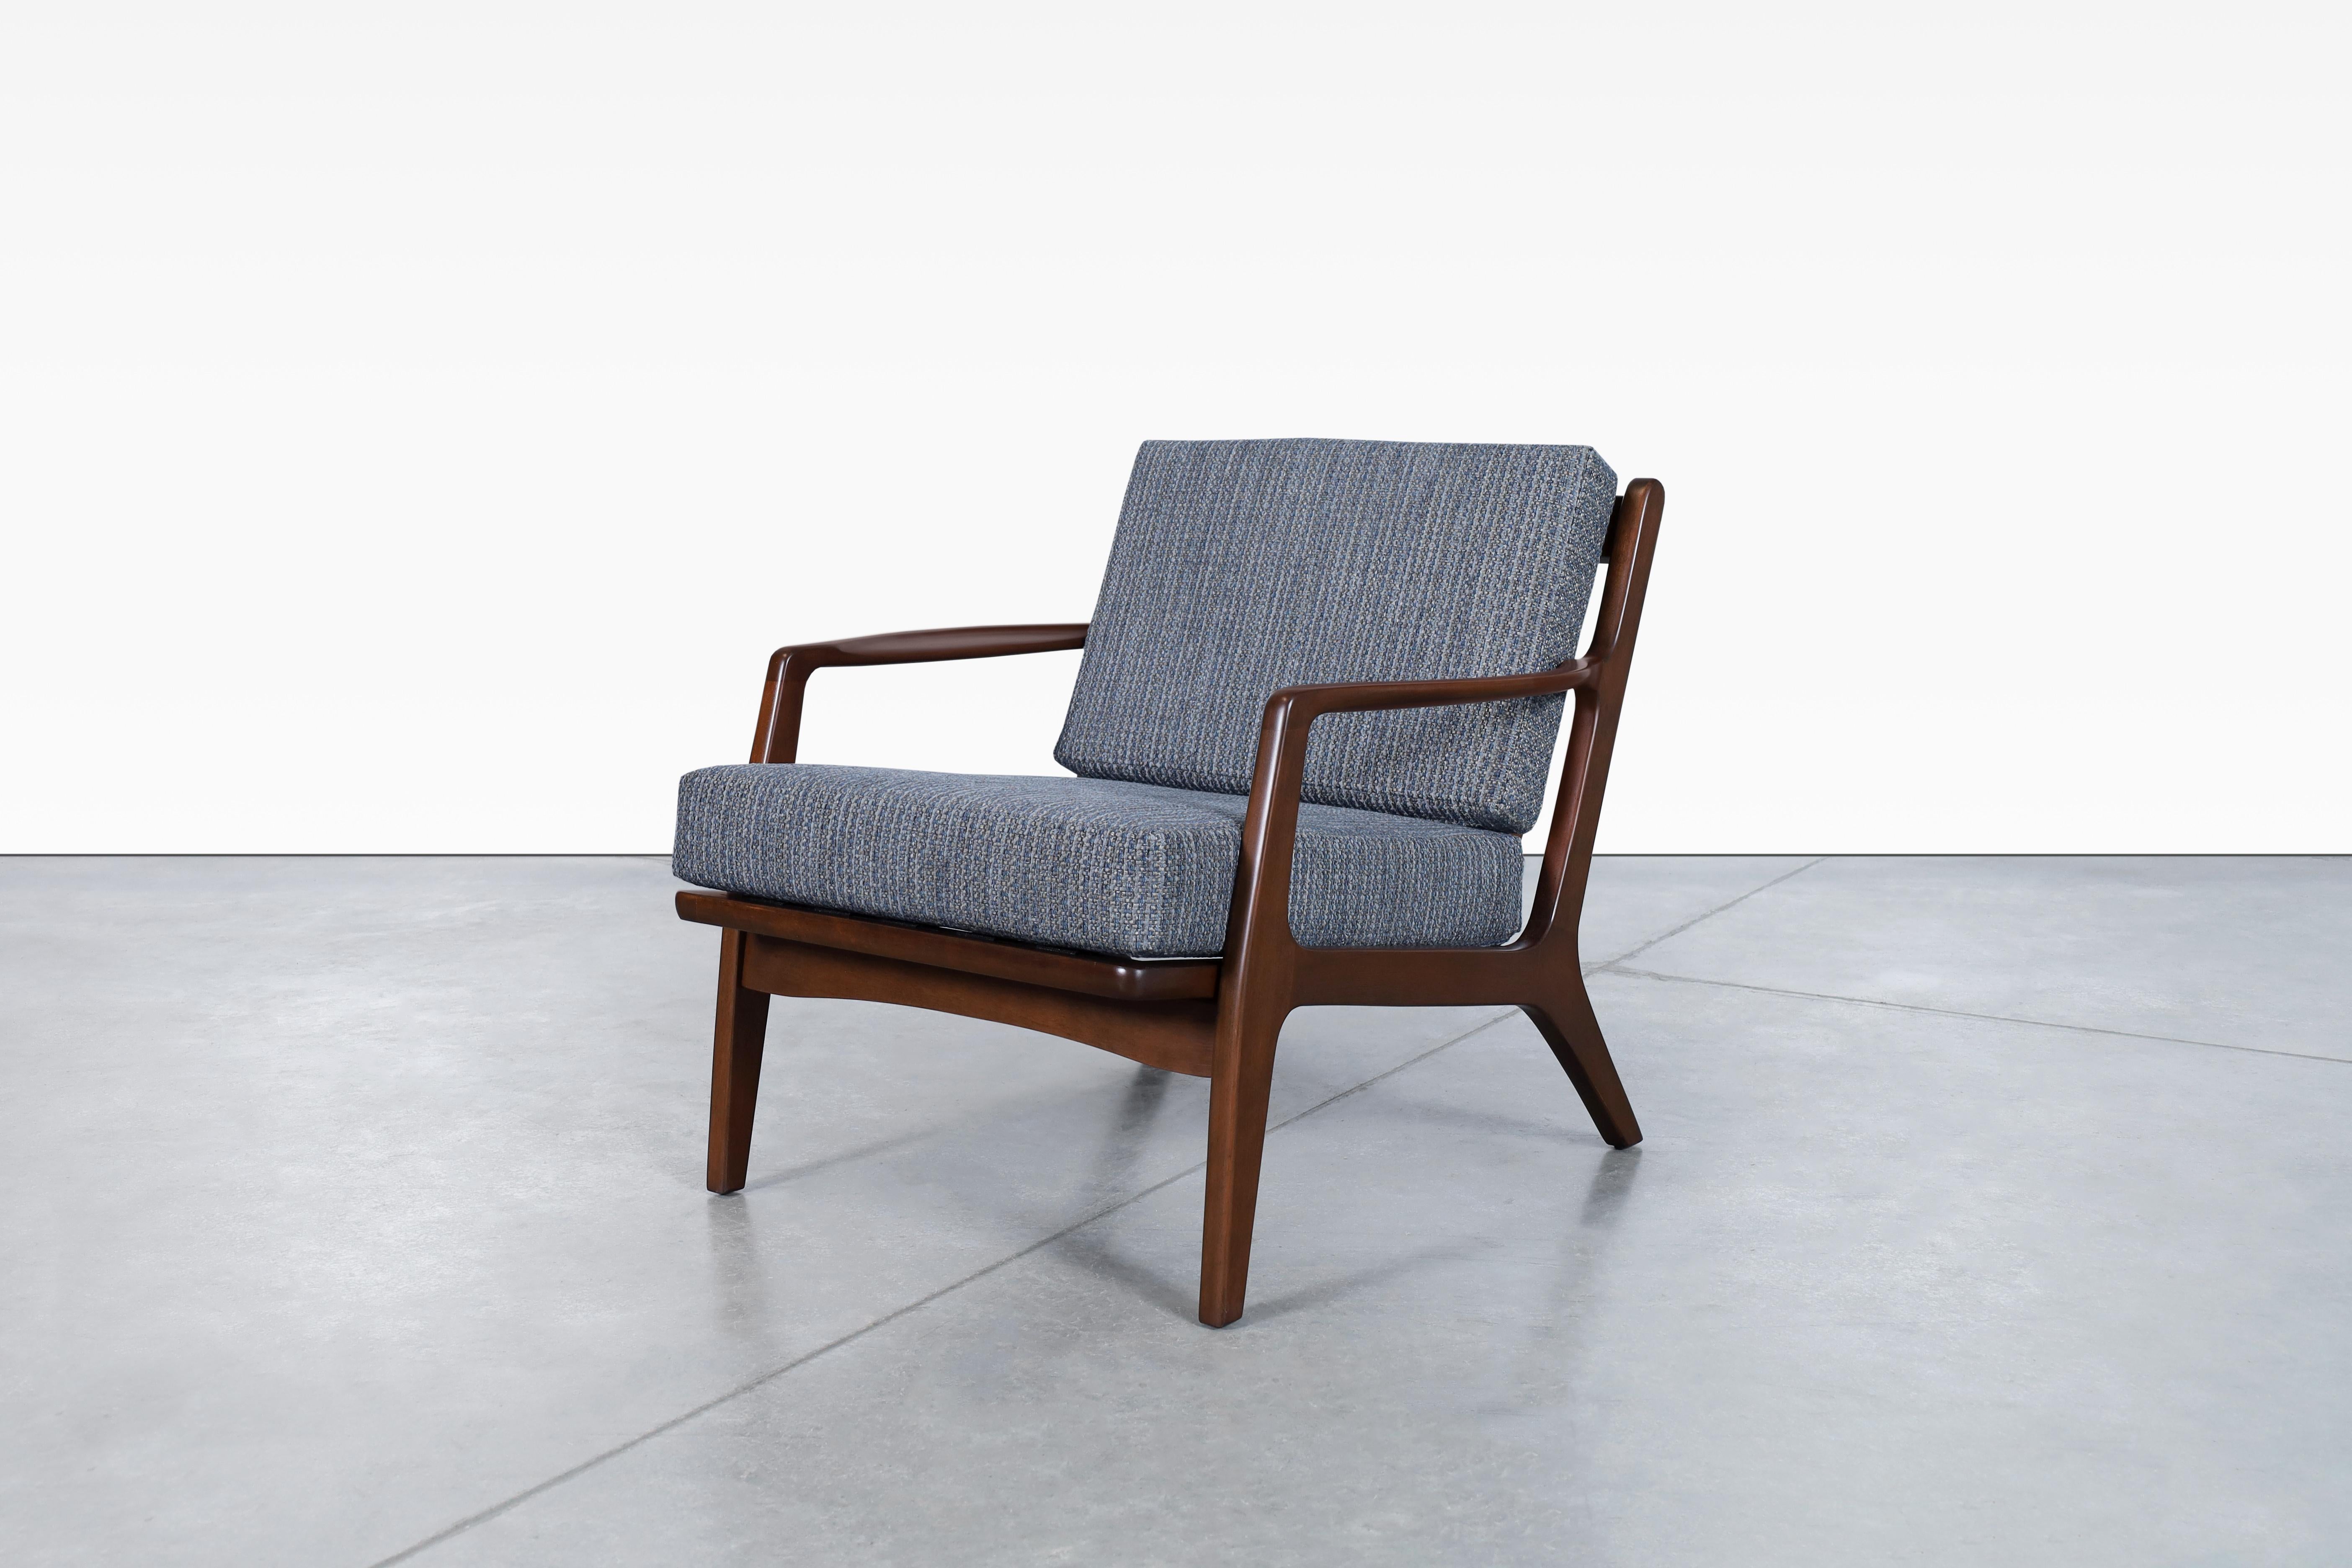 Mid-20th Century Midcentury Walnut Lounge Chairs by Ib Kofod Larsen for Selig